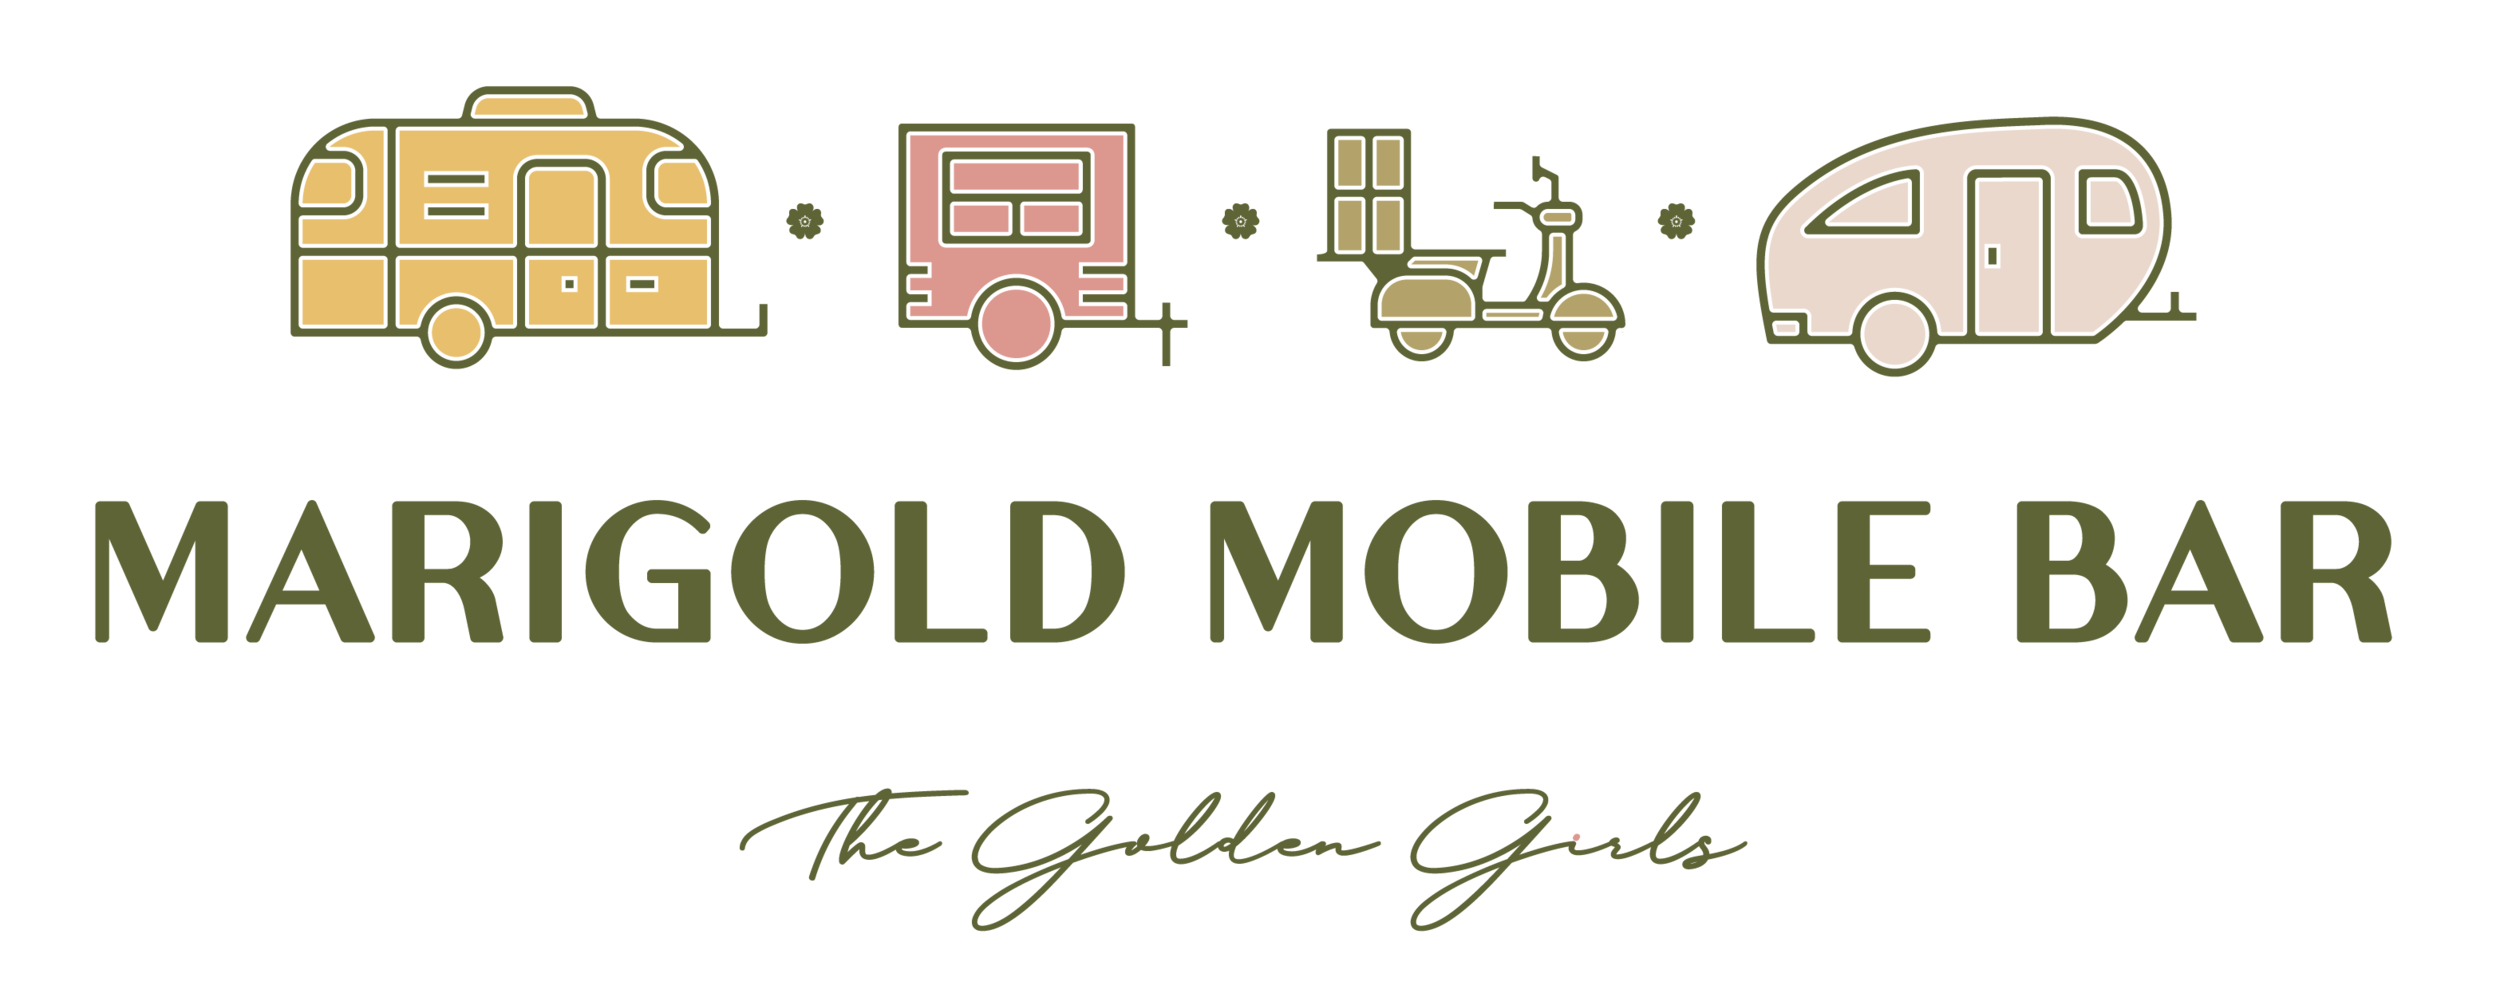 MOBILE BAR — Marigold Catering Company